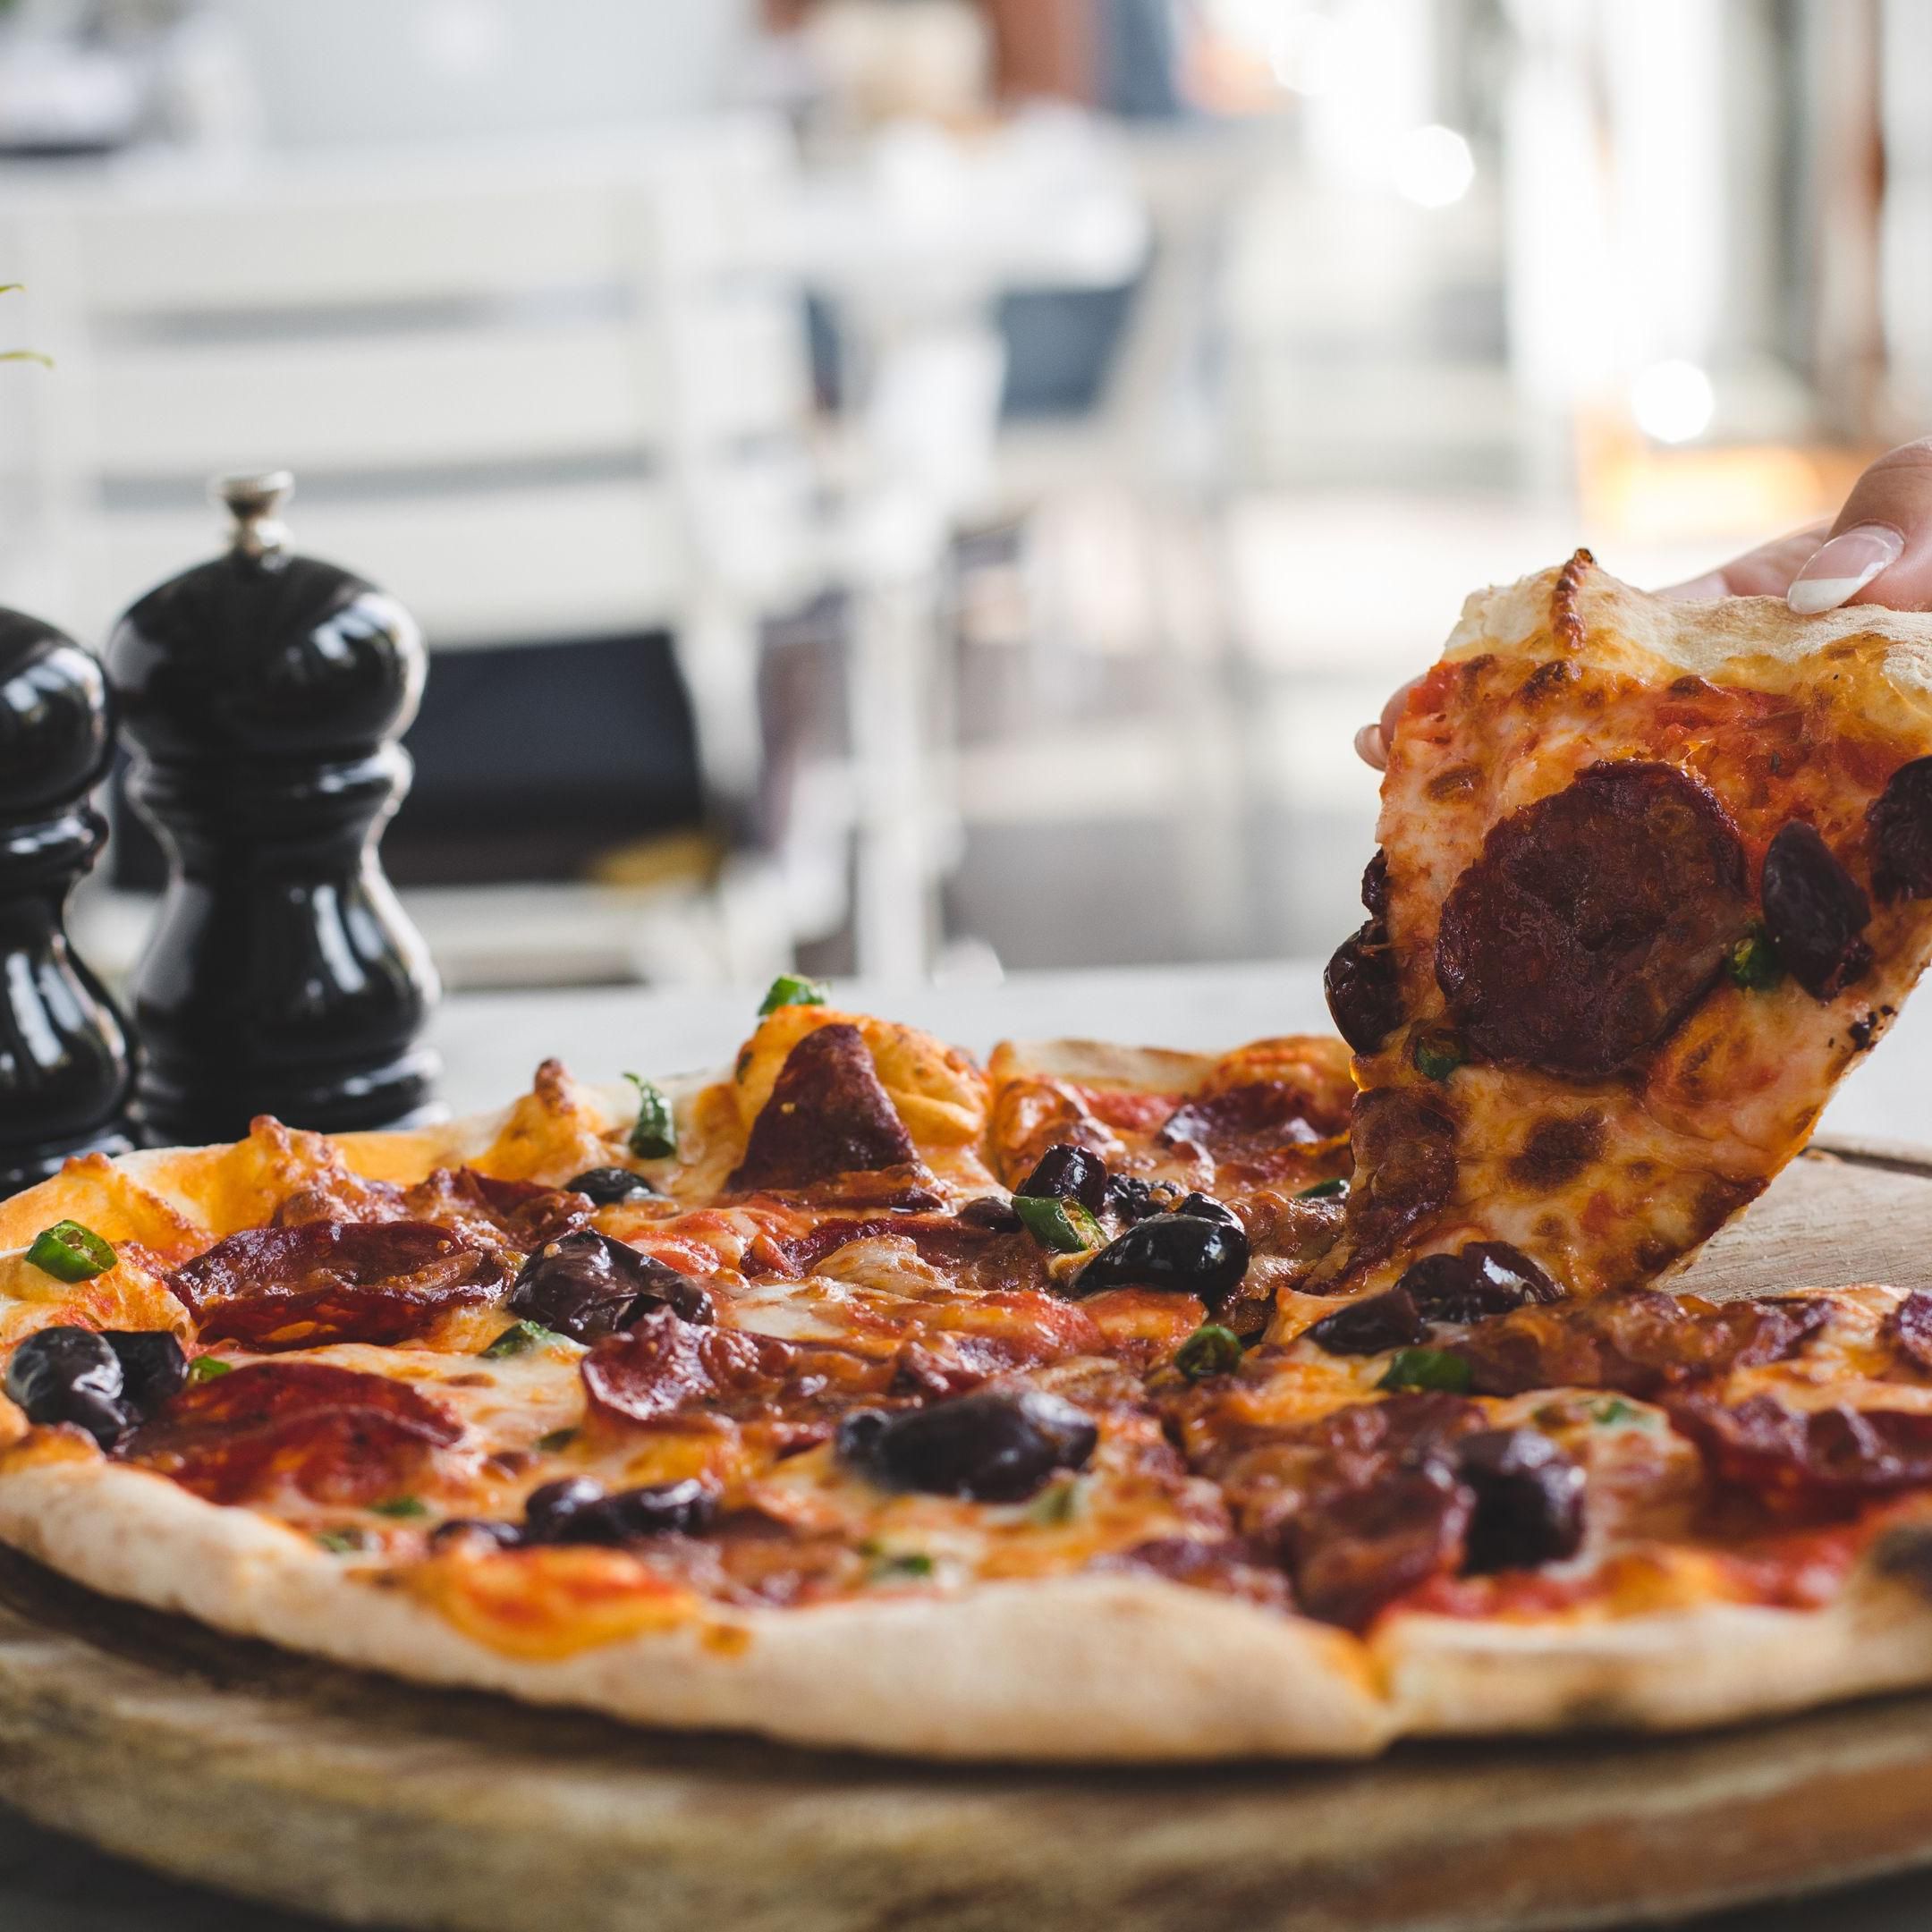 Our pizzas are always made right with the freshest ingredients